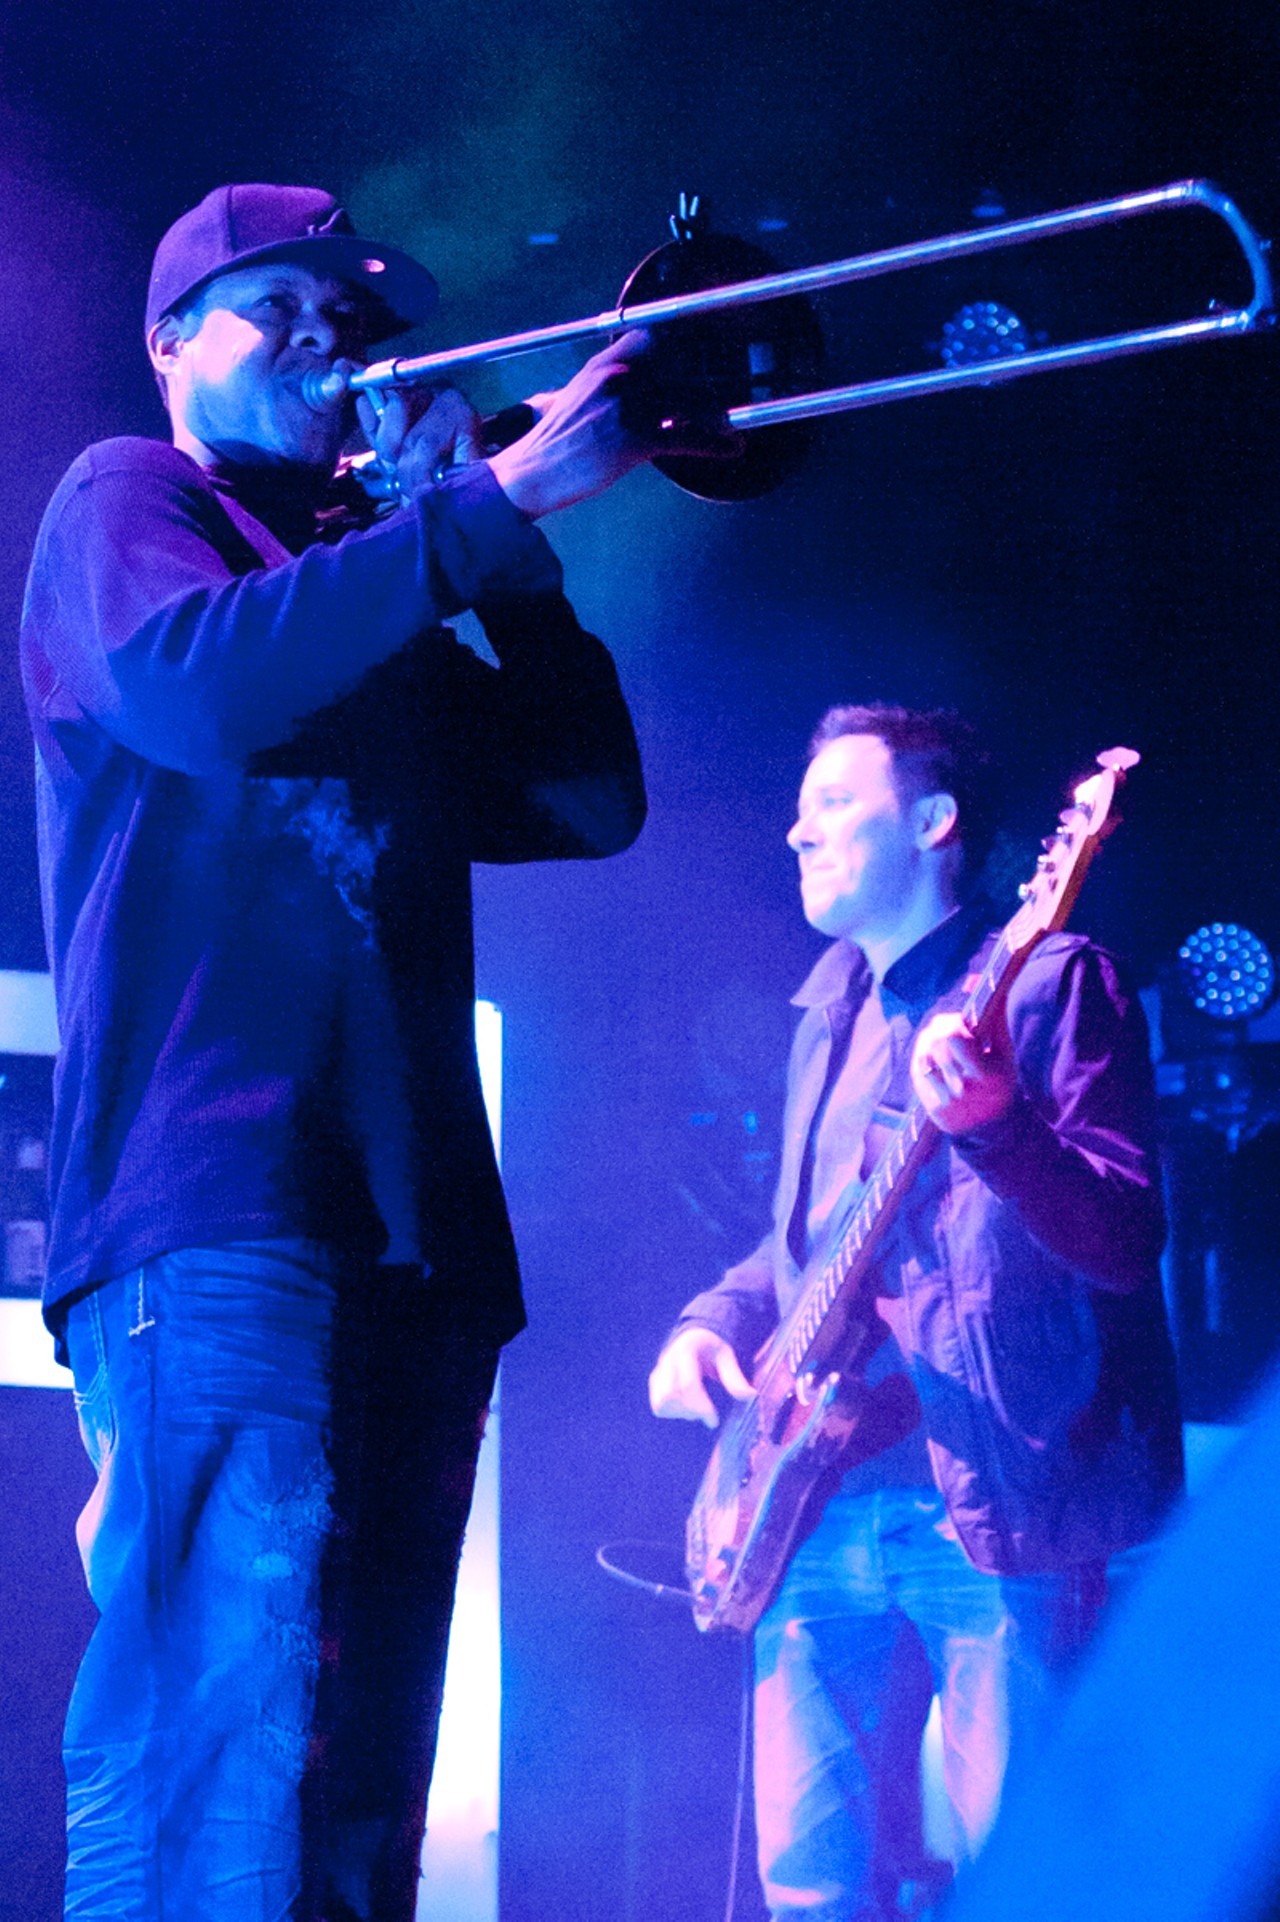 Galactic performing at the Pageant.